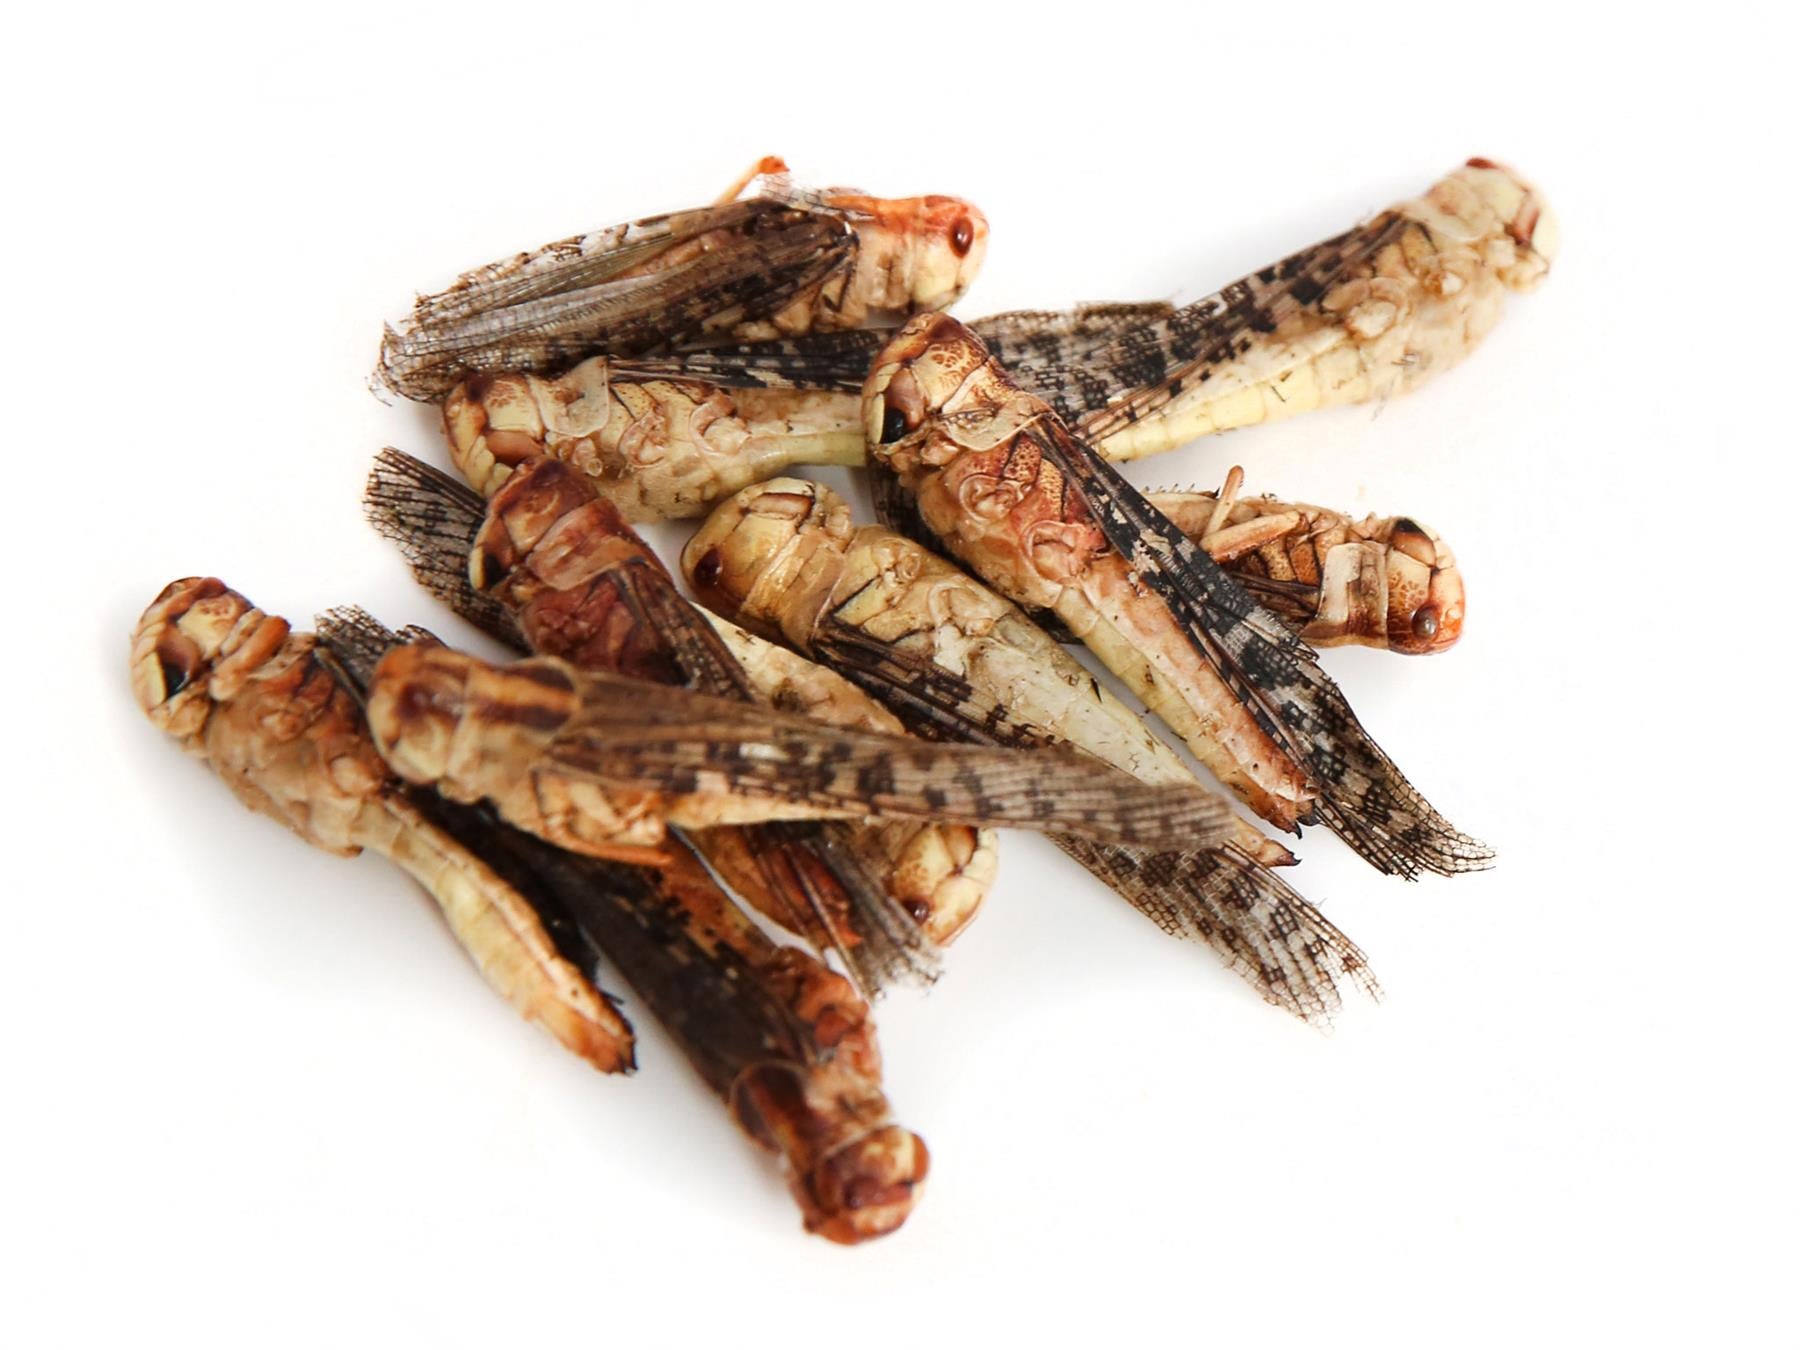 10g Edible Grasshoppers For Human Consumption